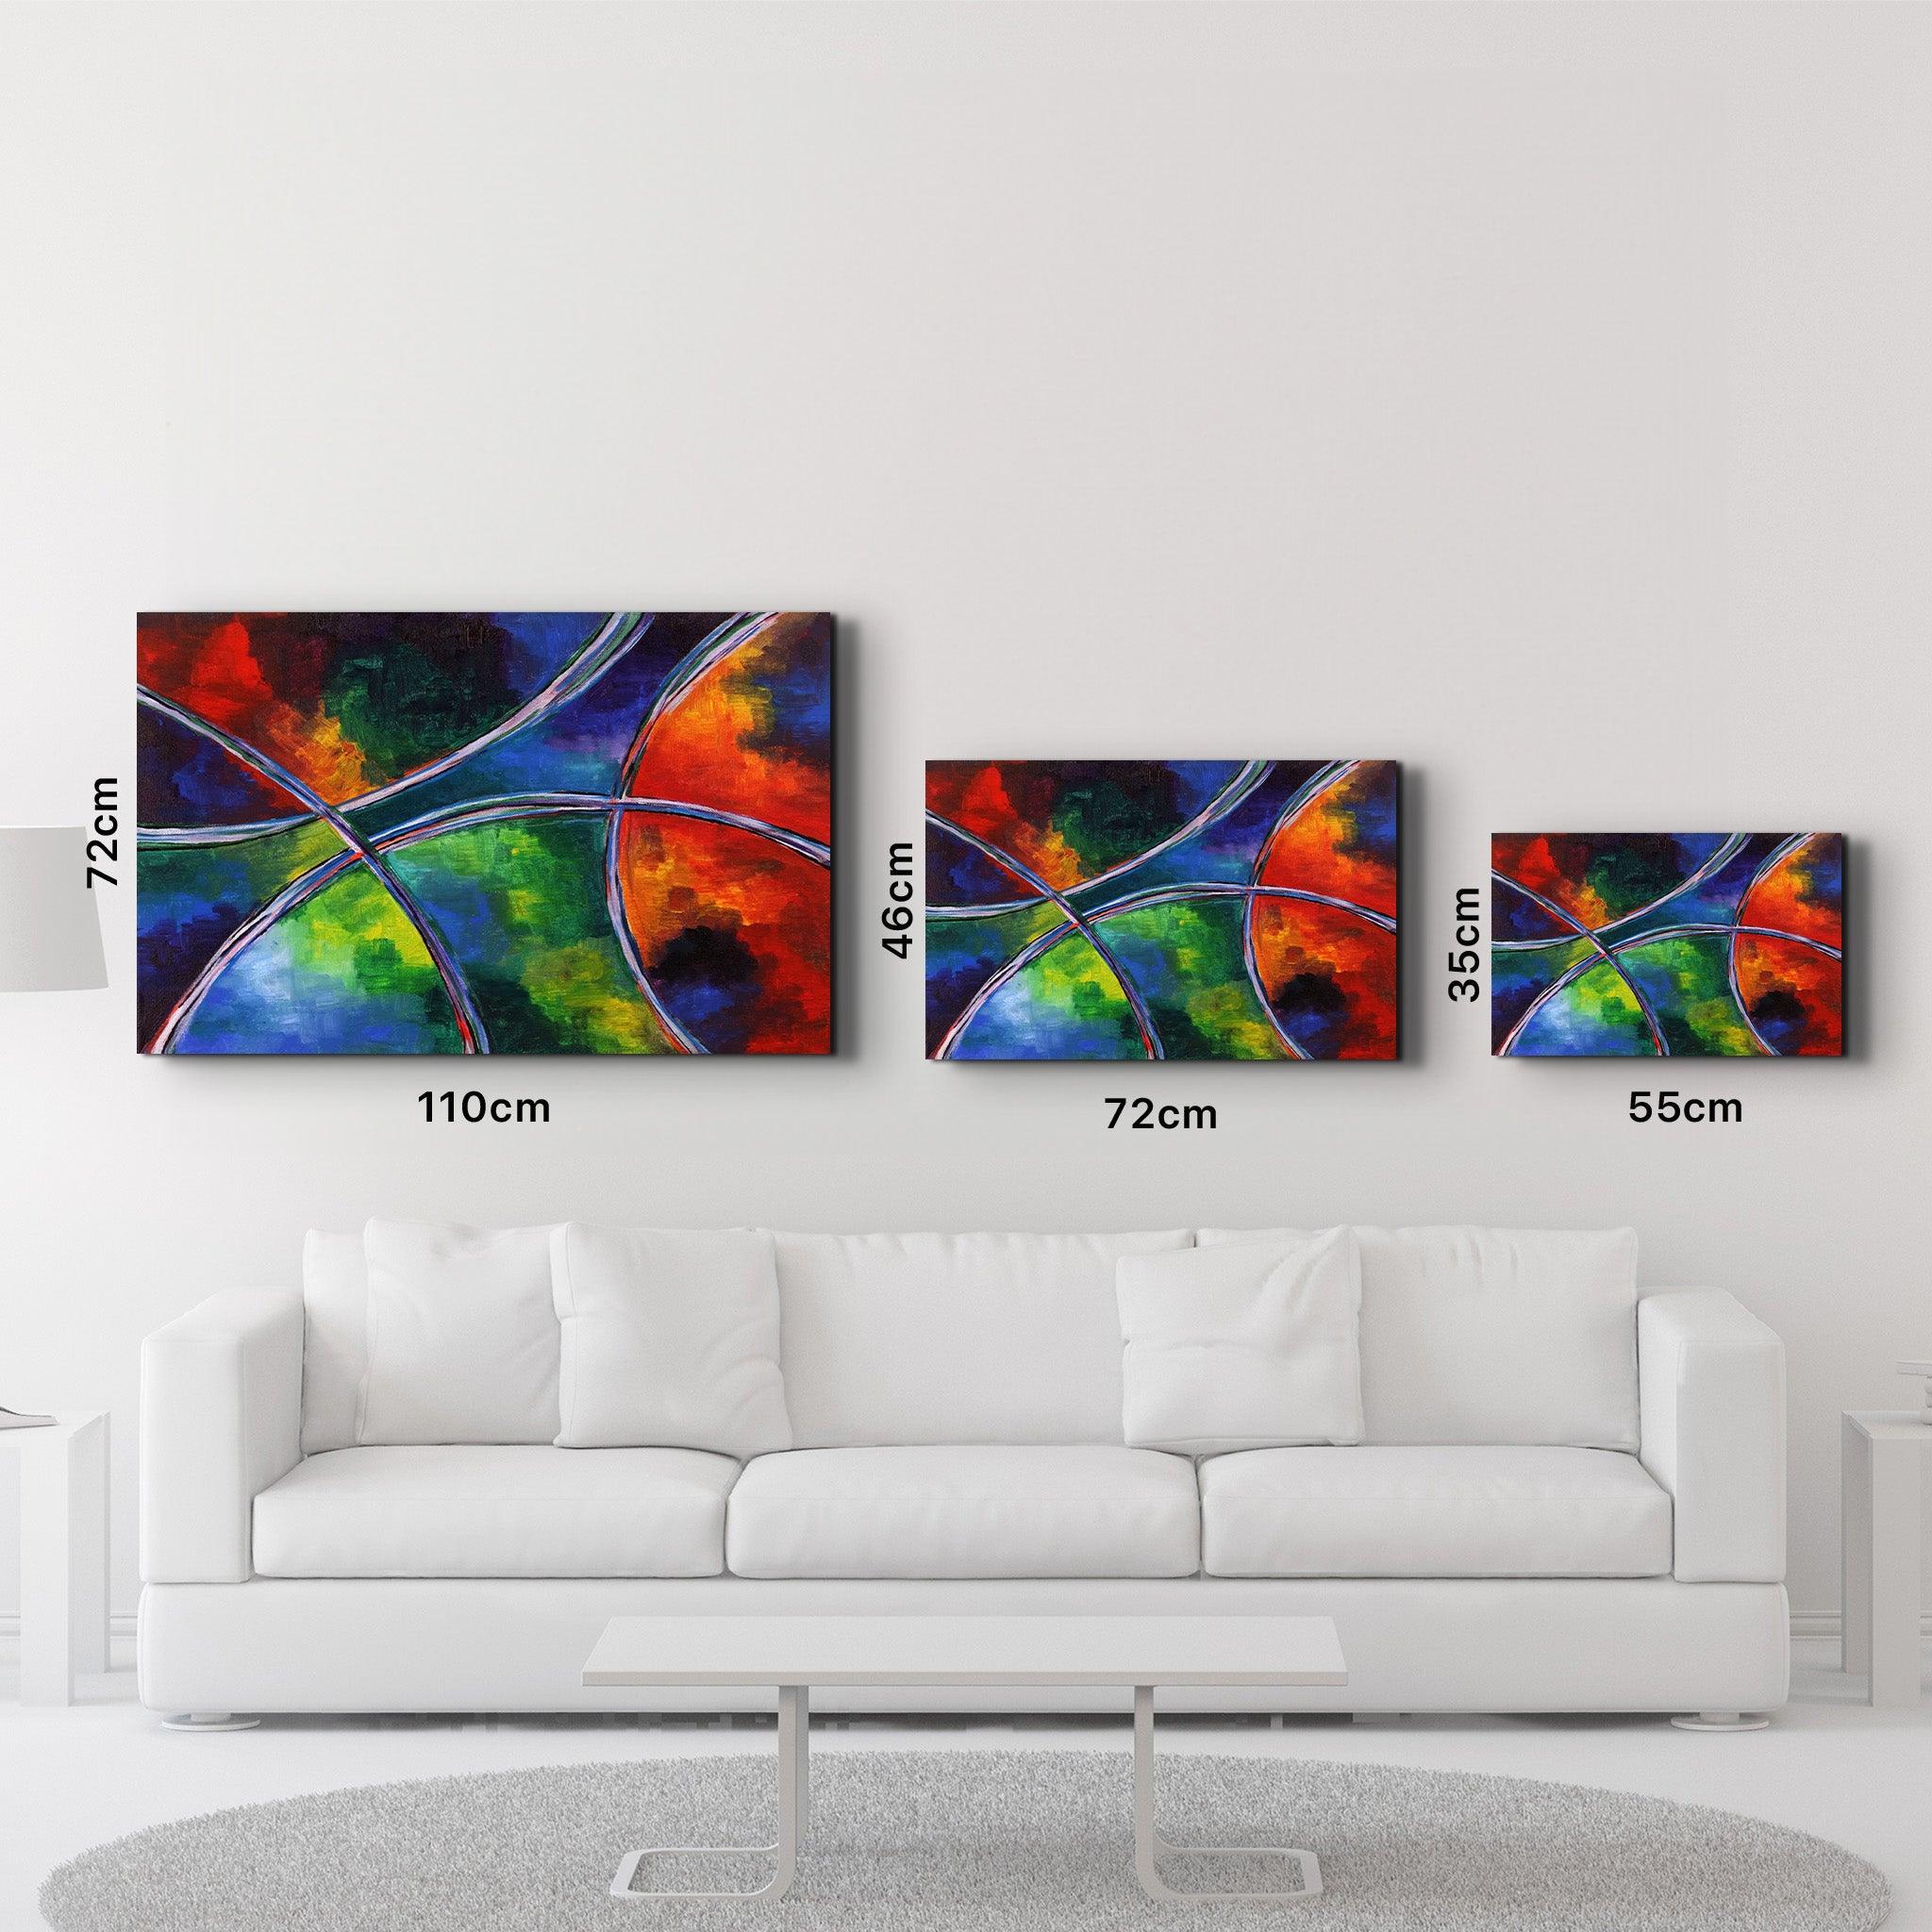 Excellence In Colors | Glass Wall Art - ArtDesigna Glass Printing Wall Art